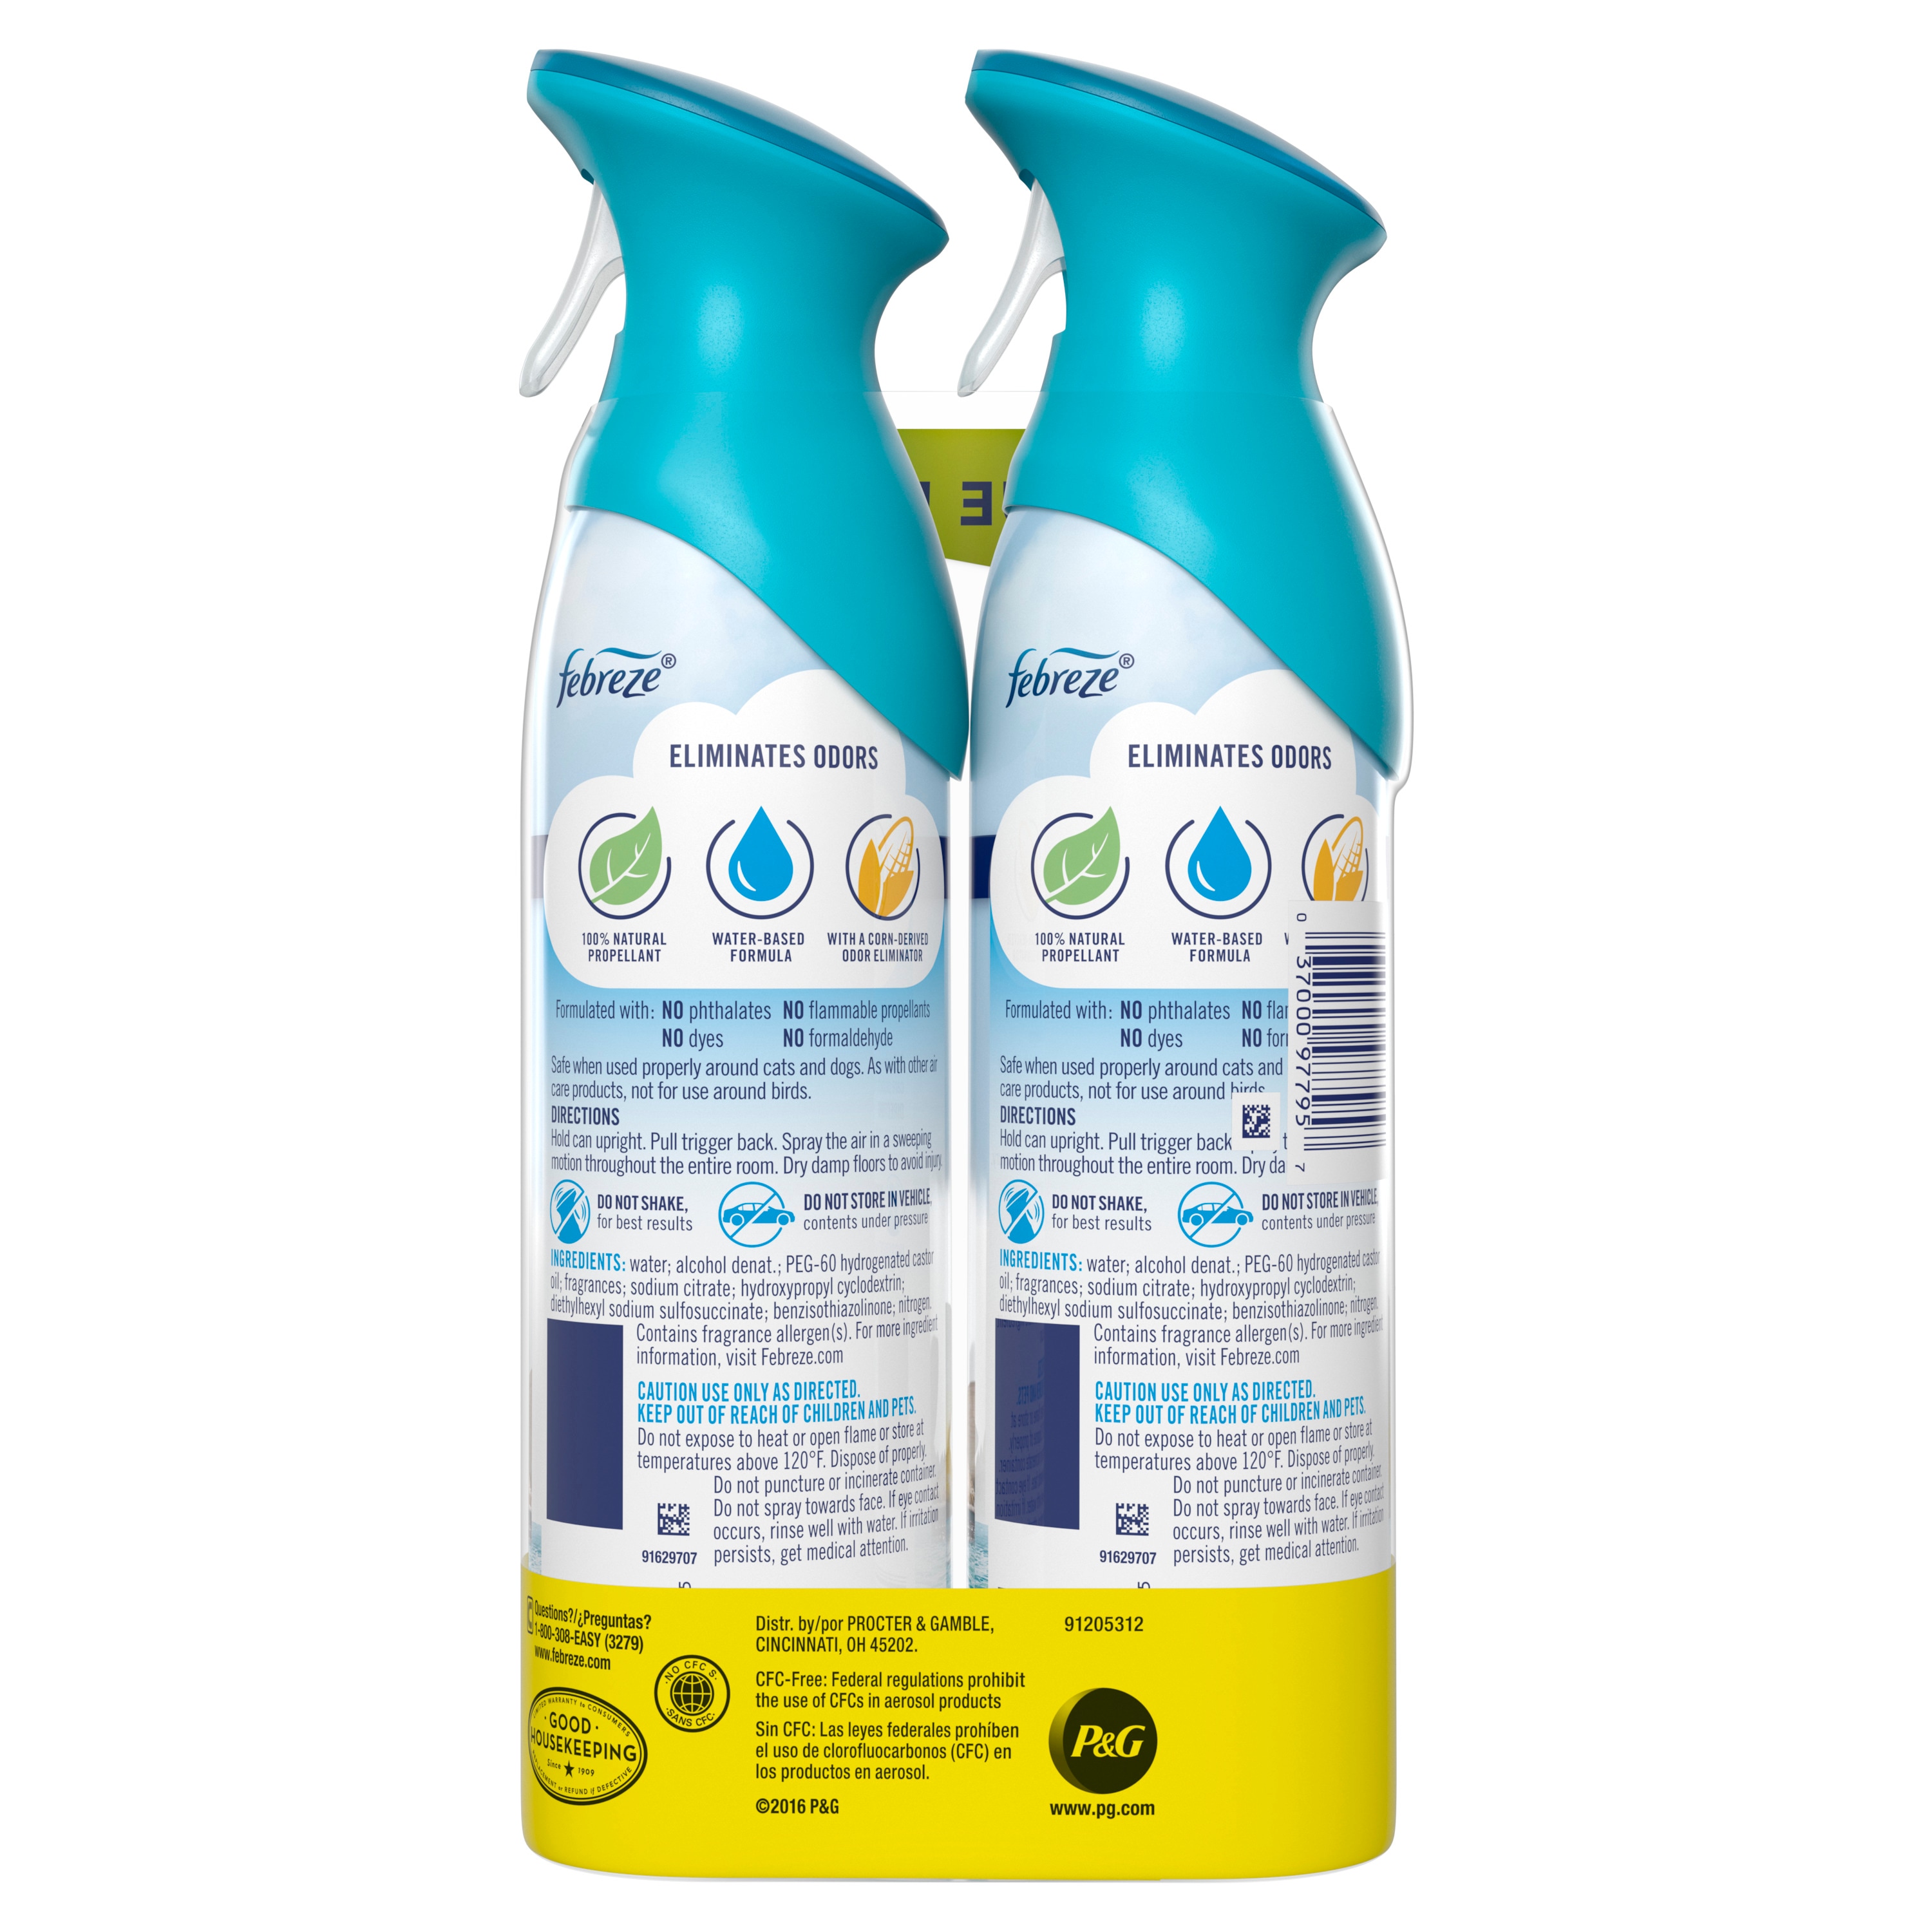 FEBREZE, 2-in-1 Antibacterial Disinfectant Spray Floral Blossom